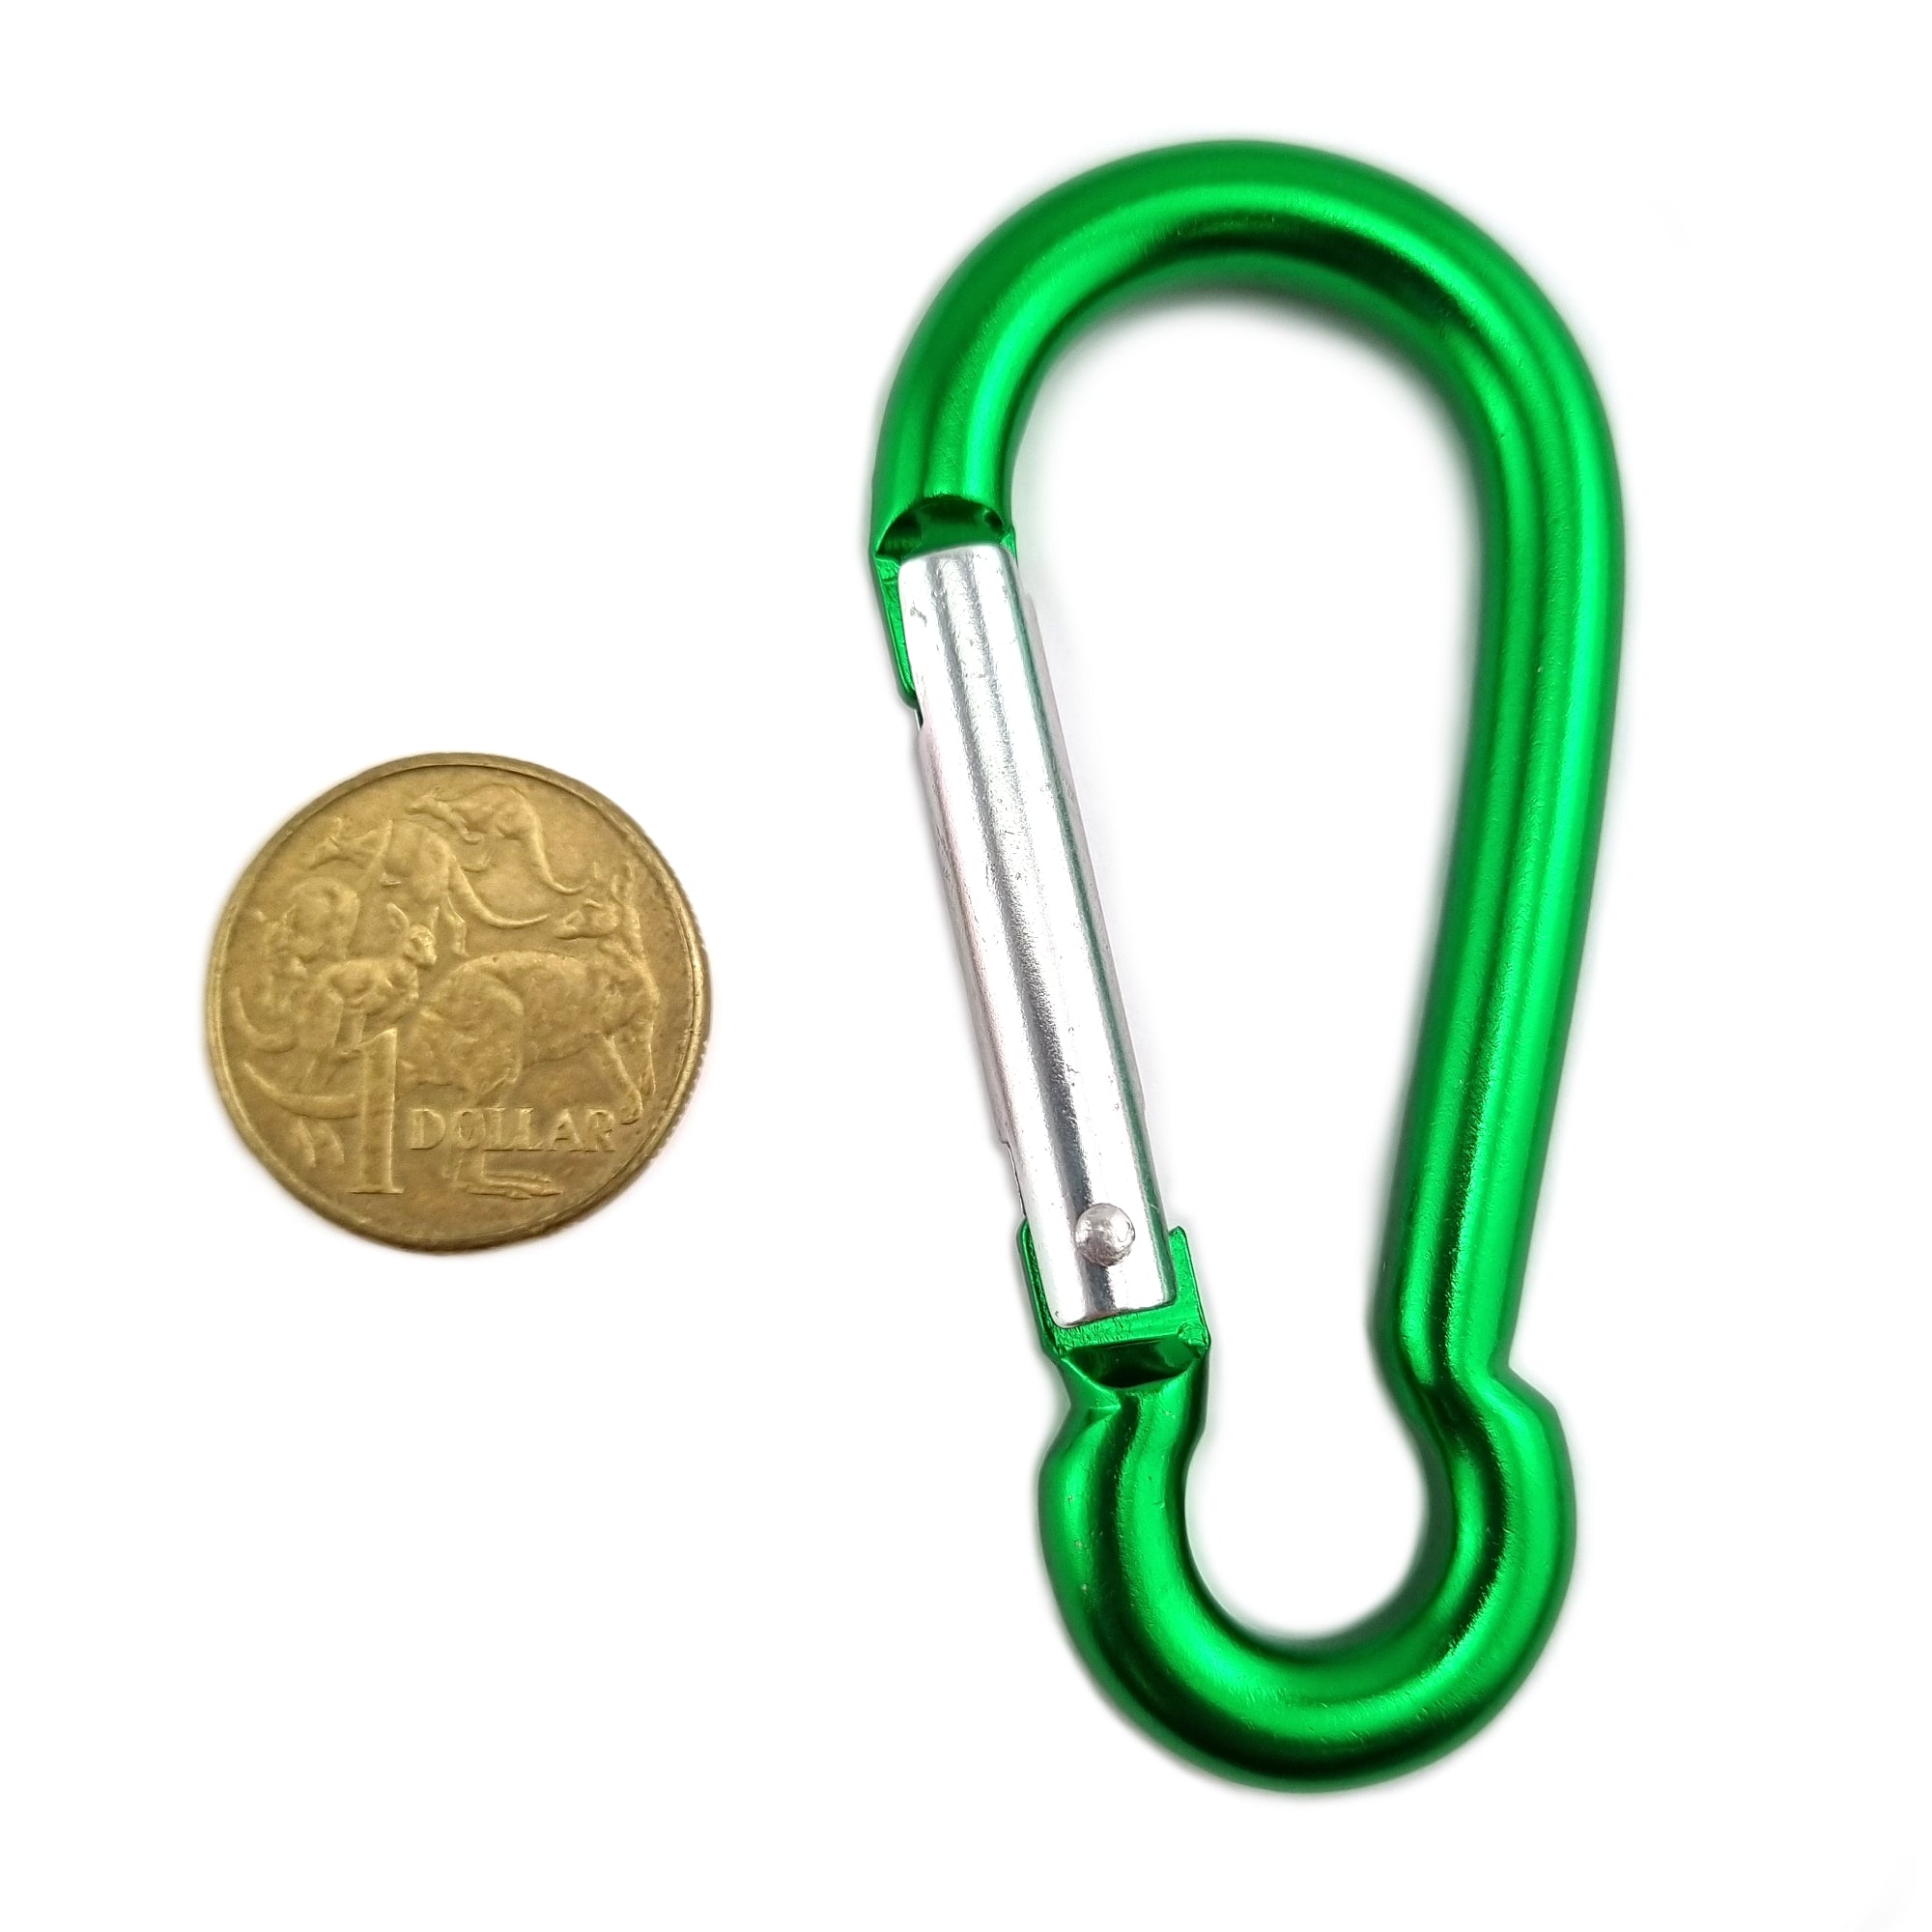 Aluminium snap hook in green, size 8mm, untested. Shop chain.com.au. Australia wide shipping